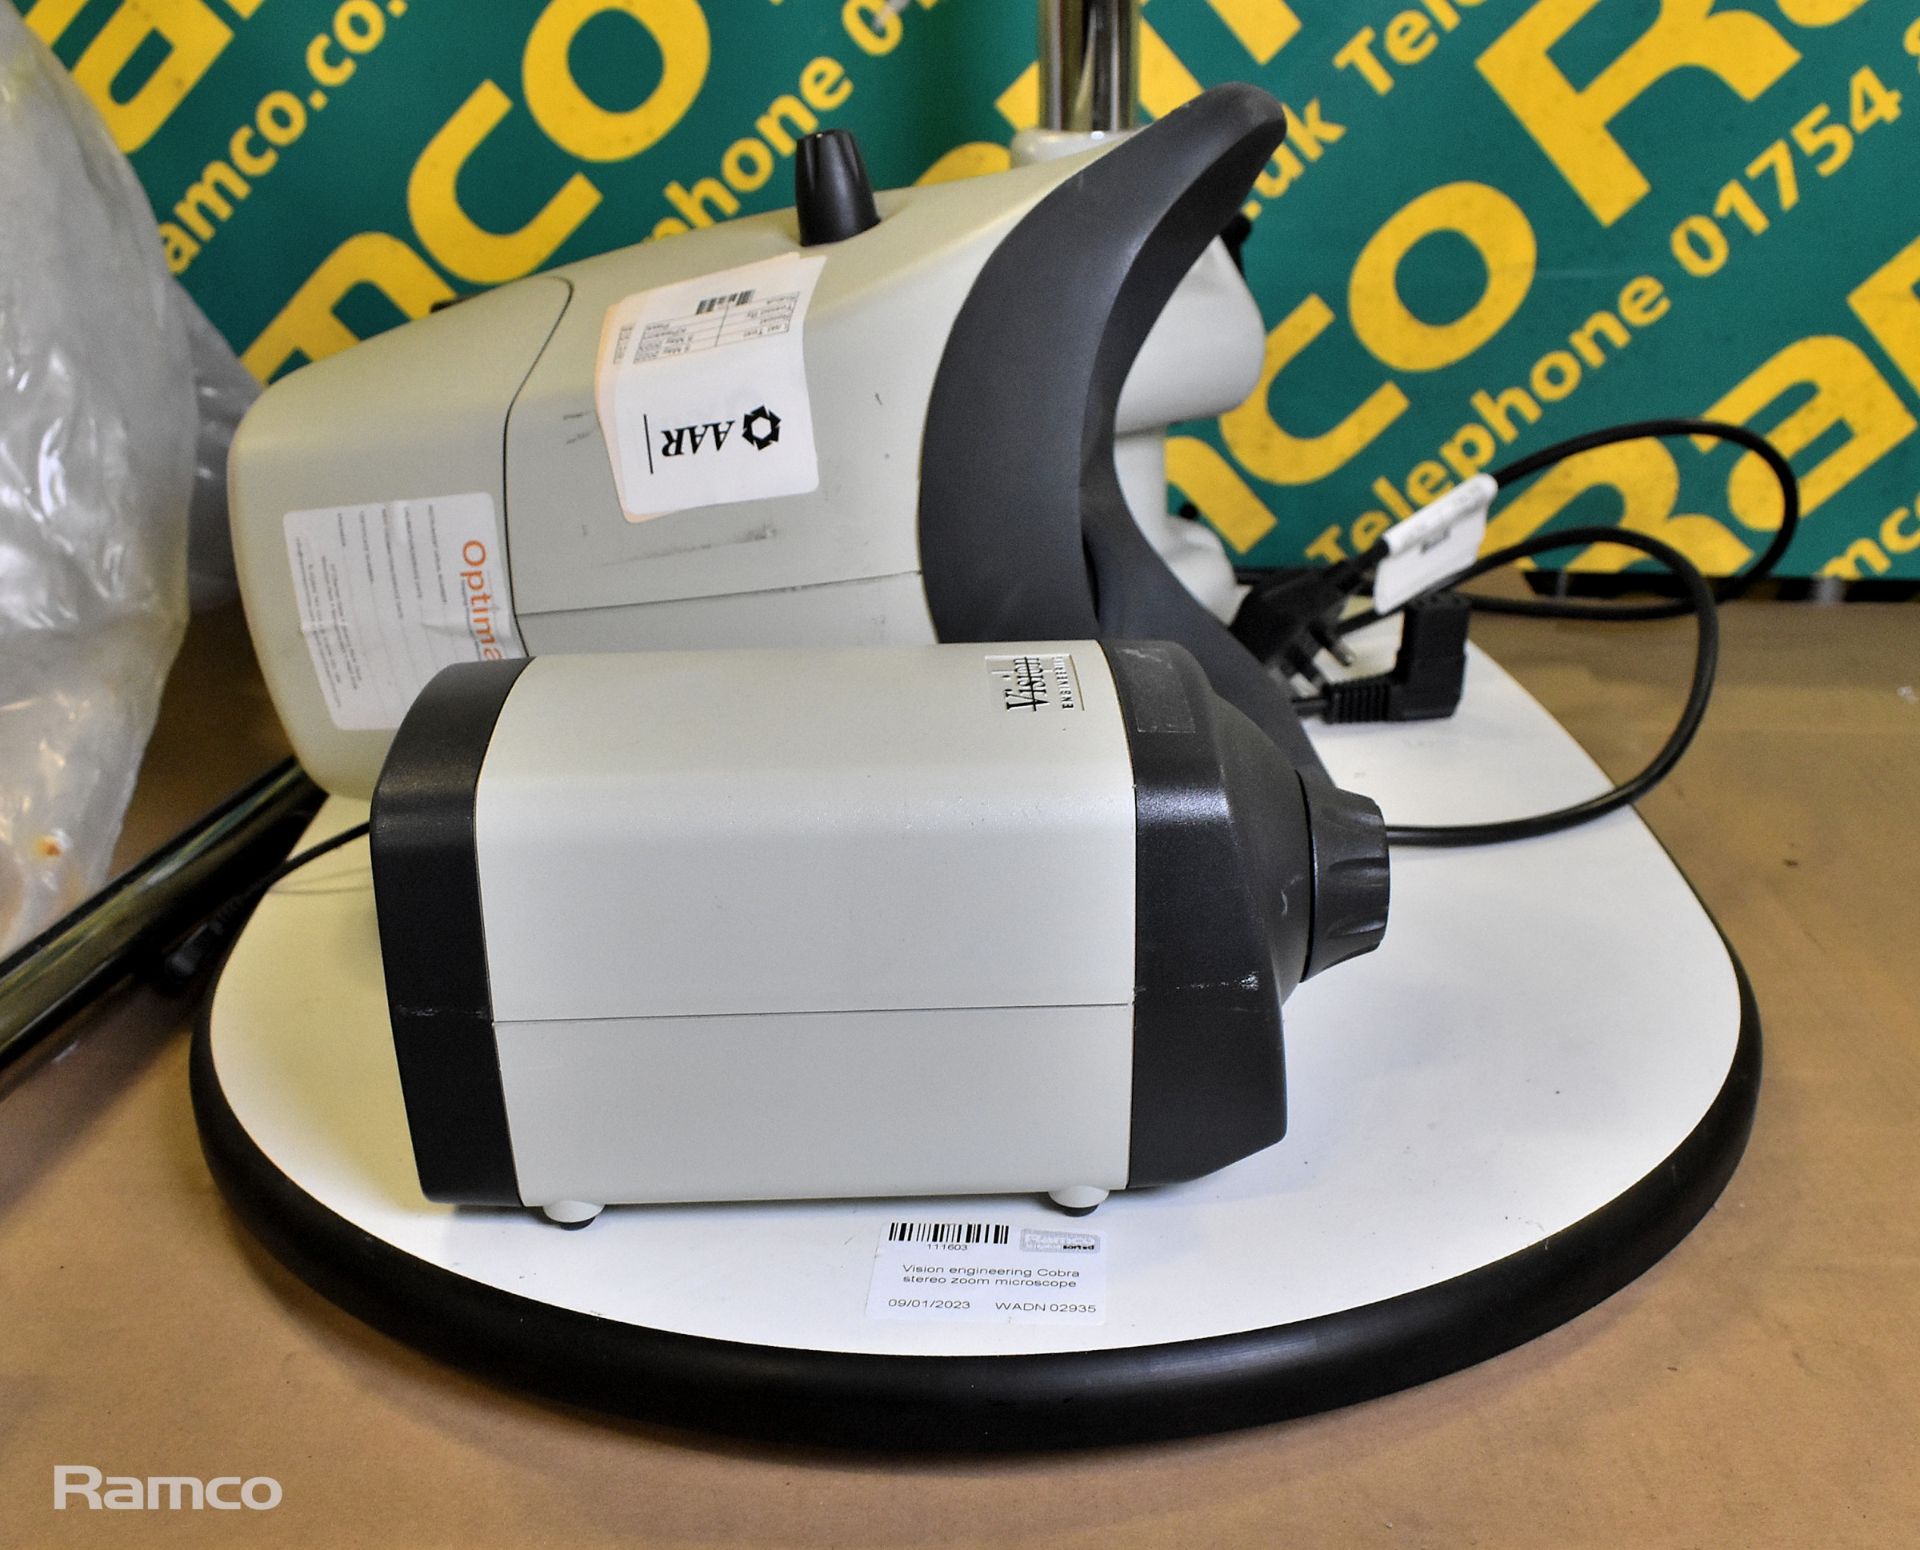 Vision engineering Cobra stereo zoom microscope - Image 7 of 10